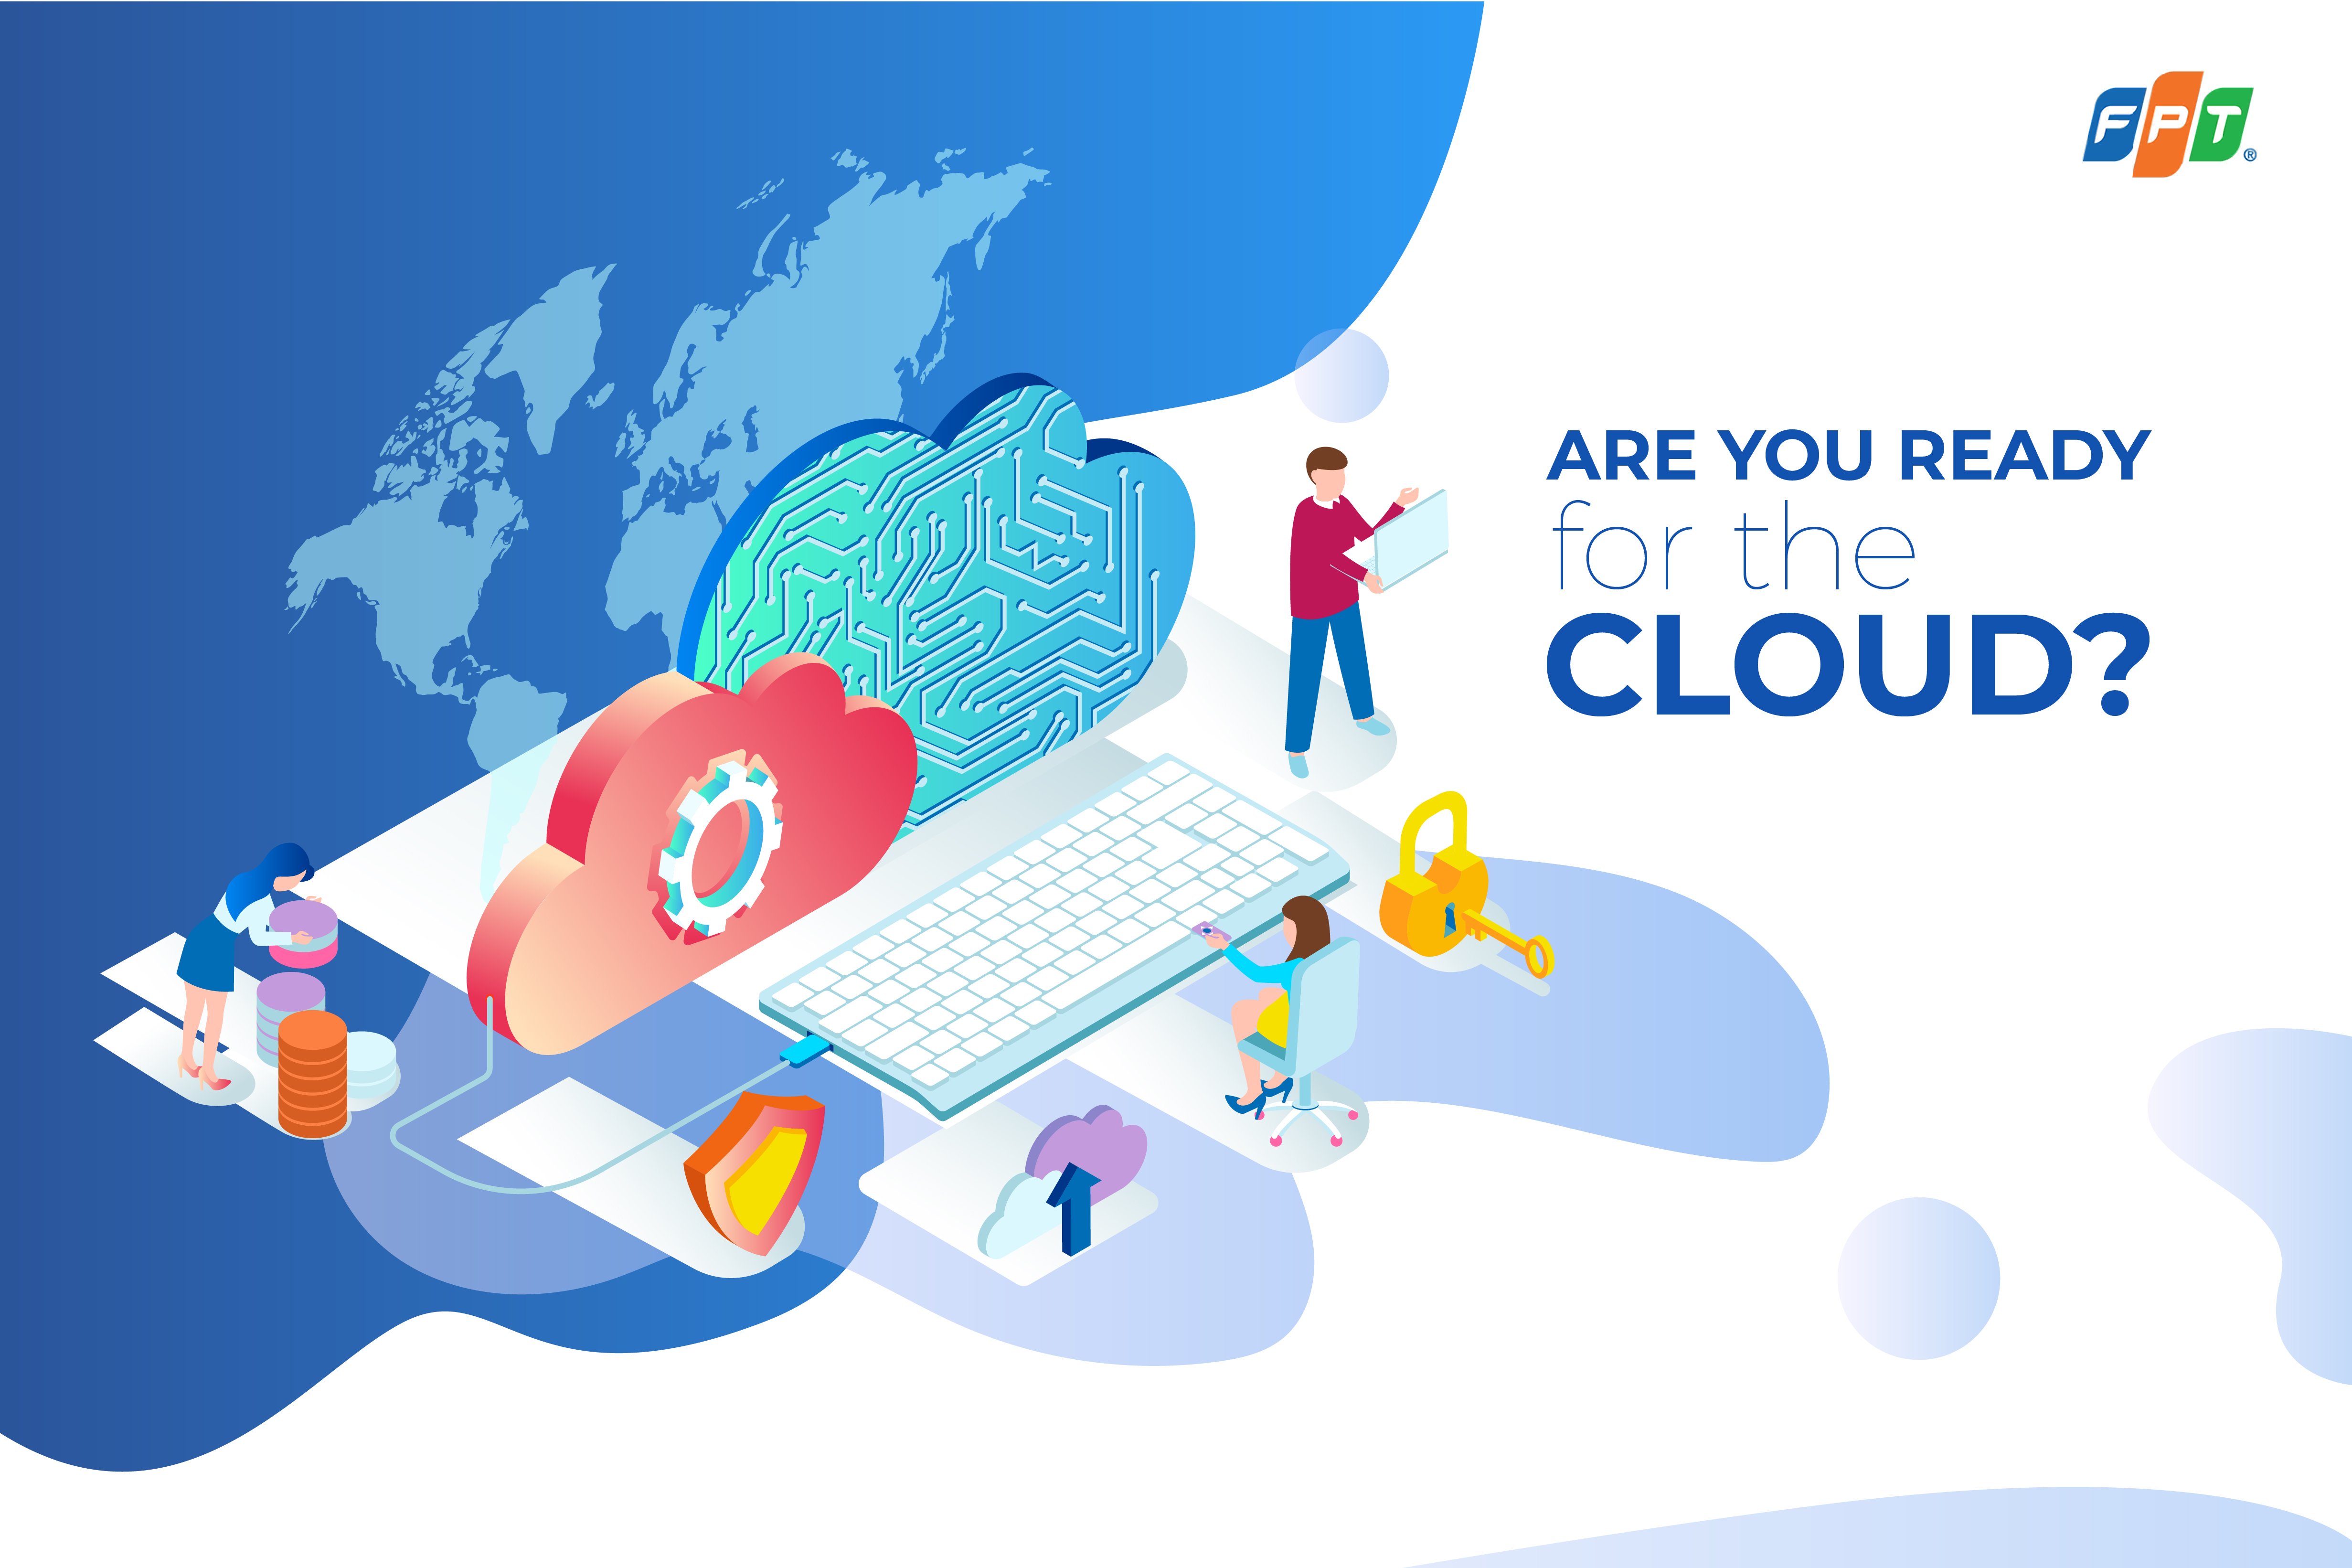 Are You Ready for the Cloud?